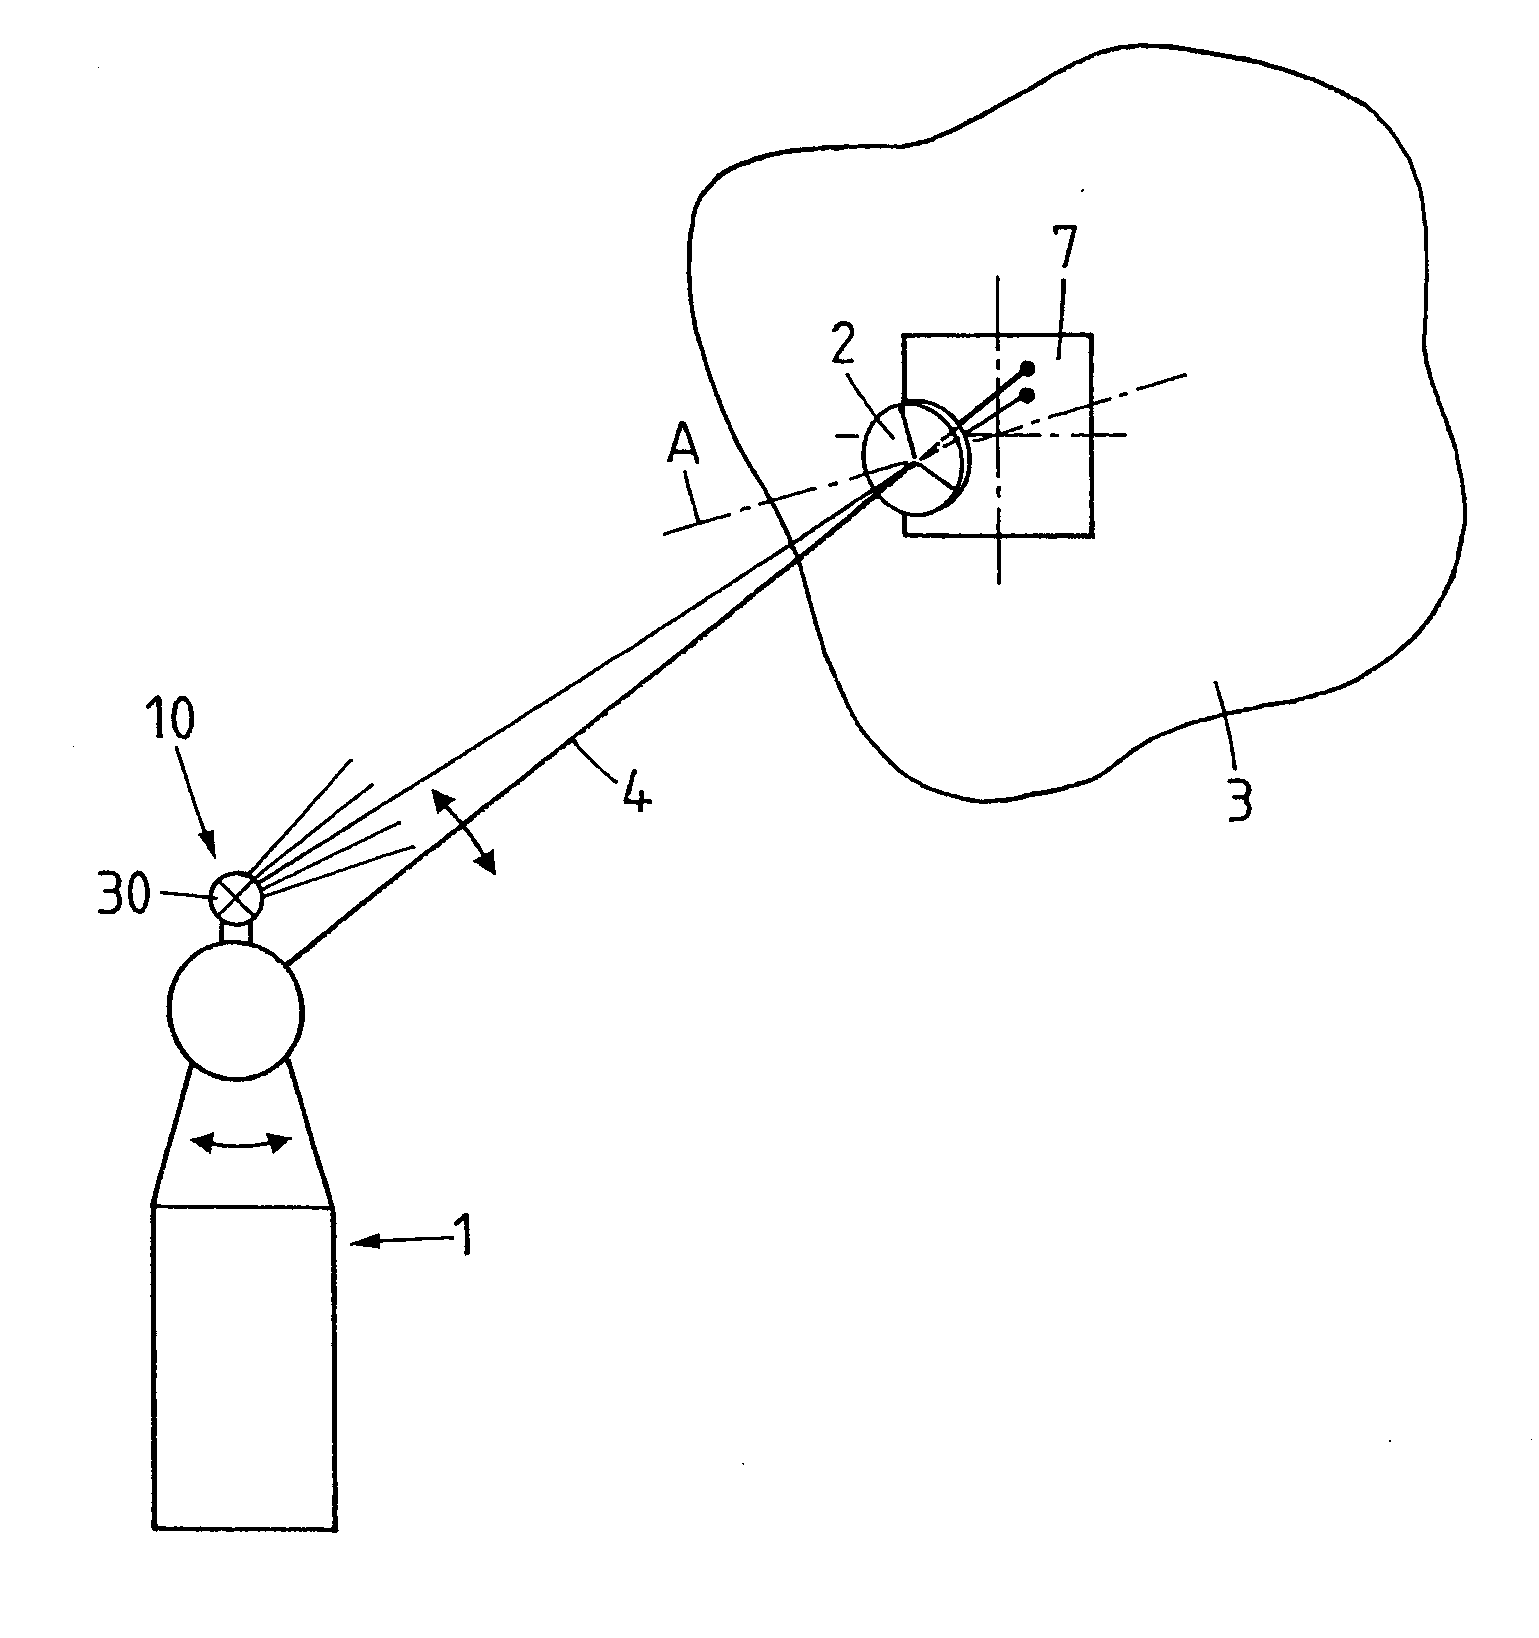 Measurement system for determining six degrees of freedom of an object